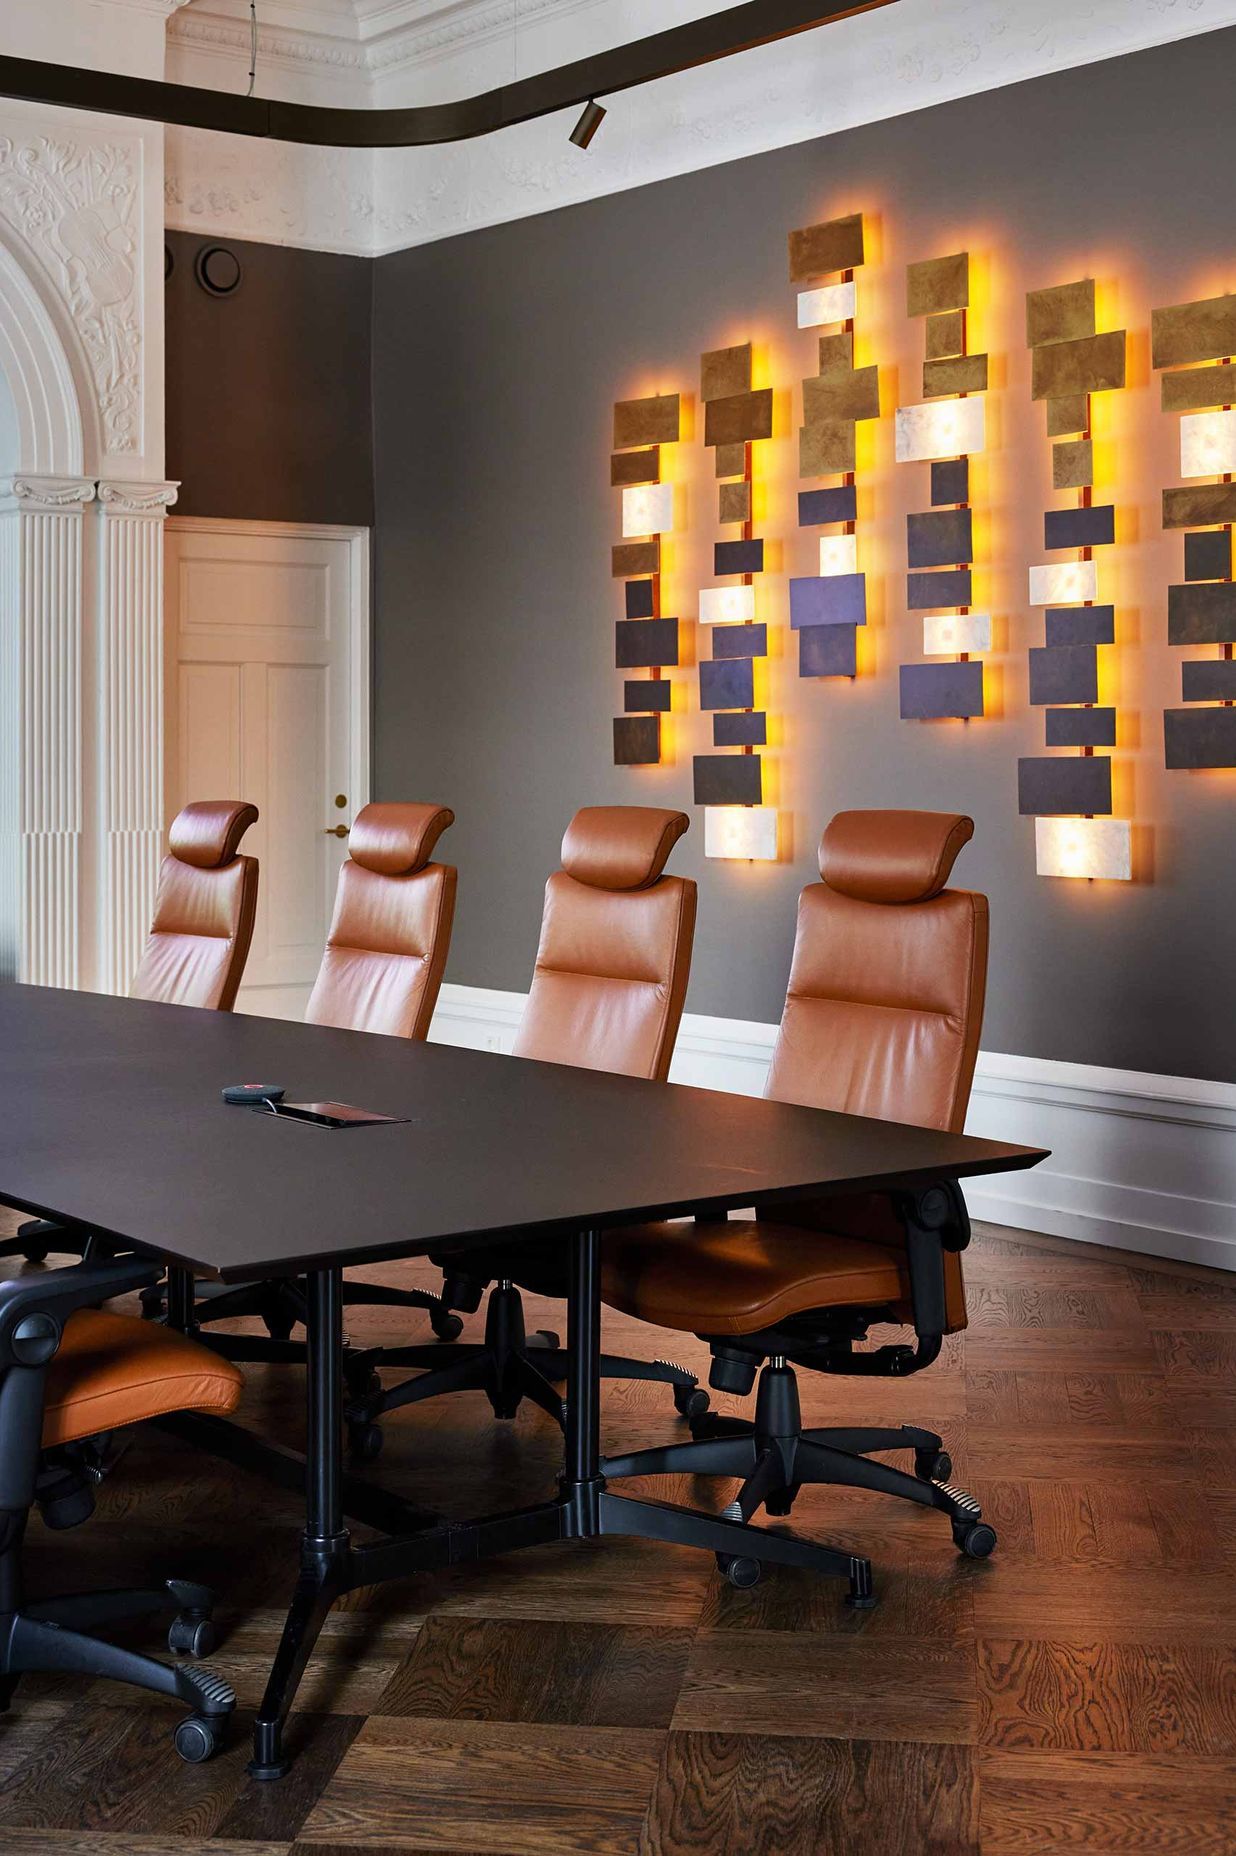 Ergonomic HÅG Tribute seating and warm lighting provides a welcoming environment to Oslo's Forte boardroom.